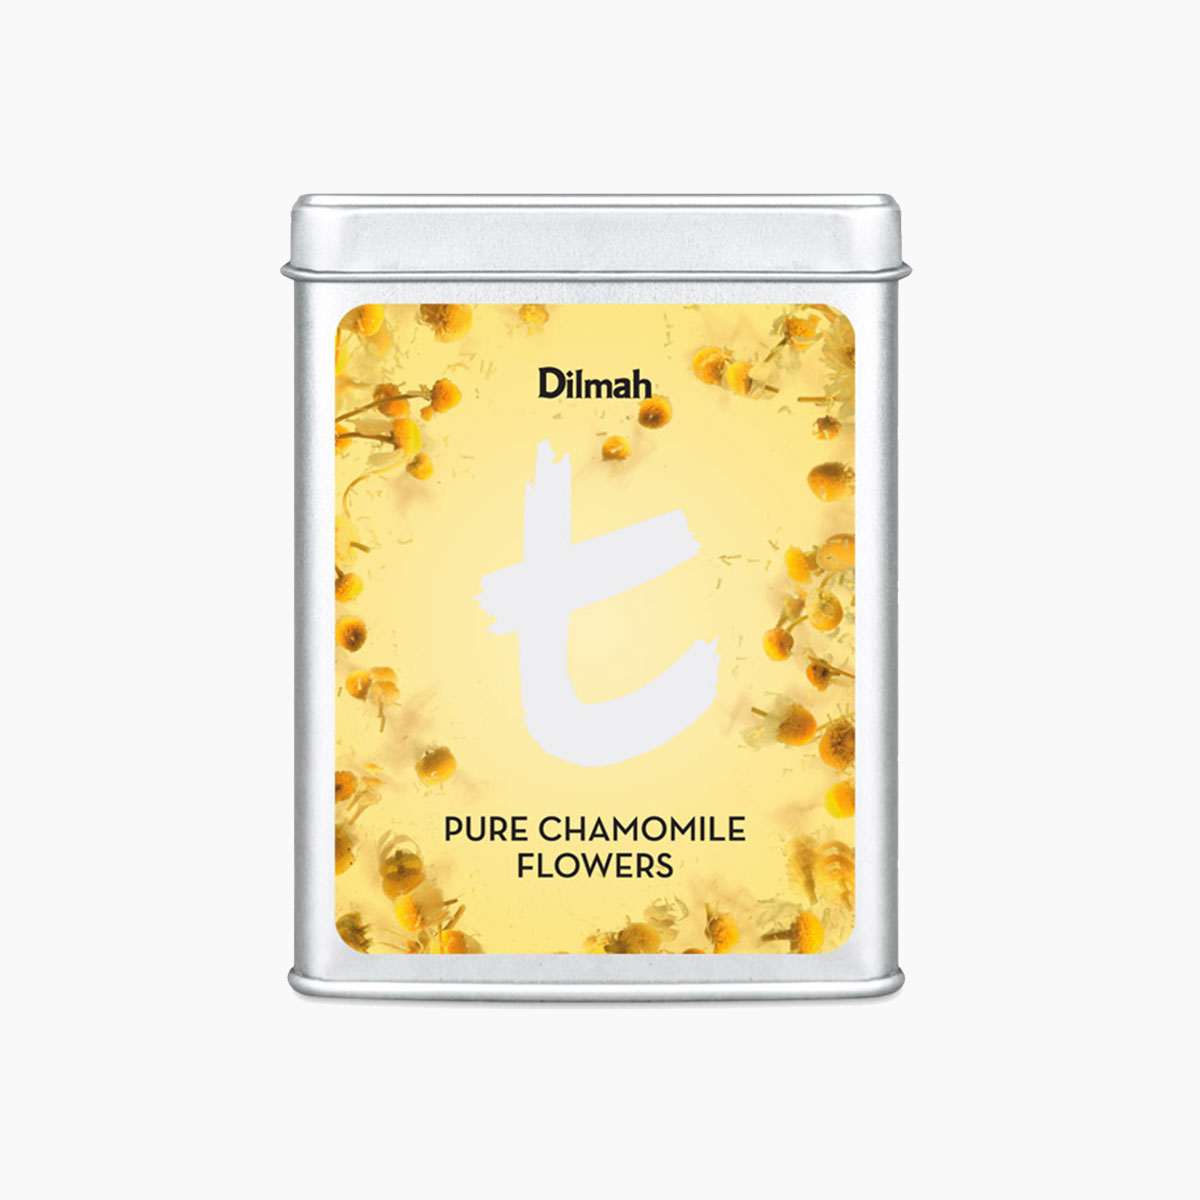 PURE CHAMOMILE FLOWERS 42g